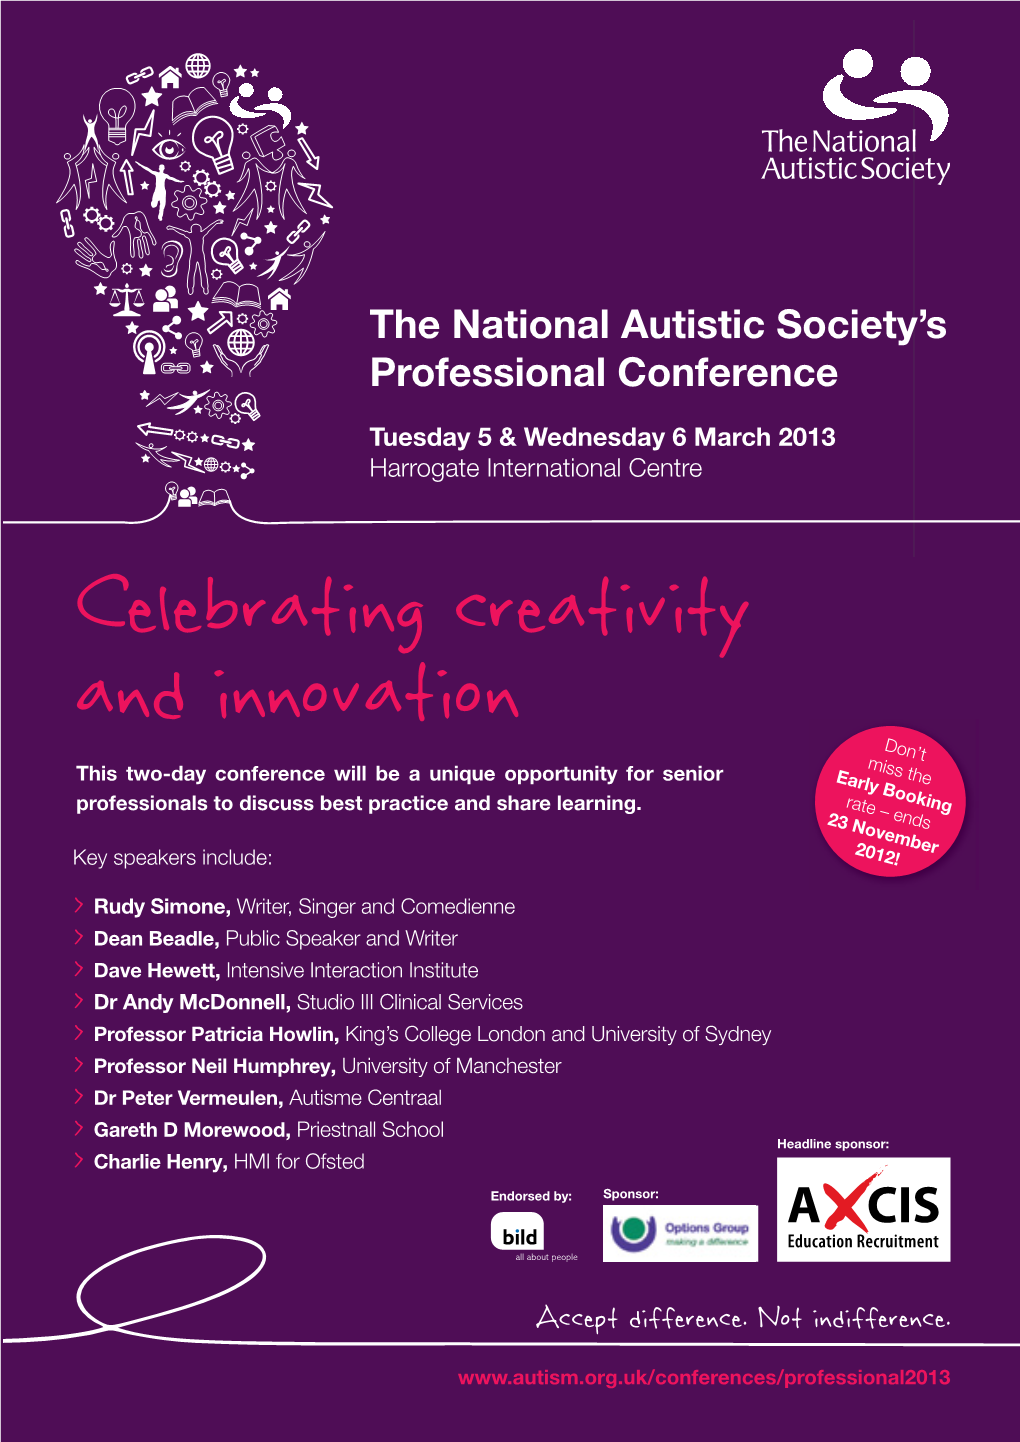 The National Autistic Society's Professional